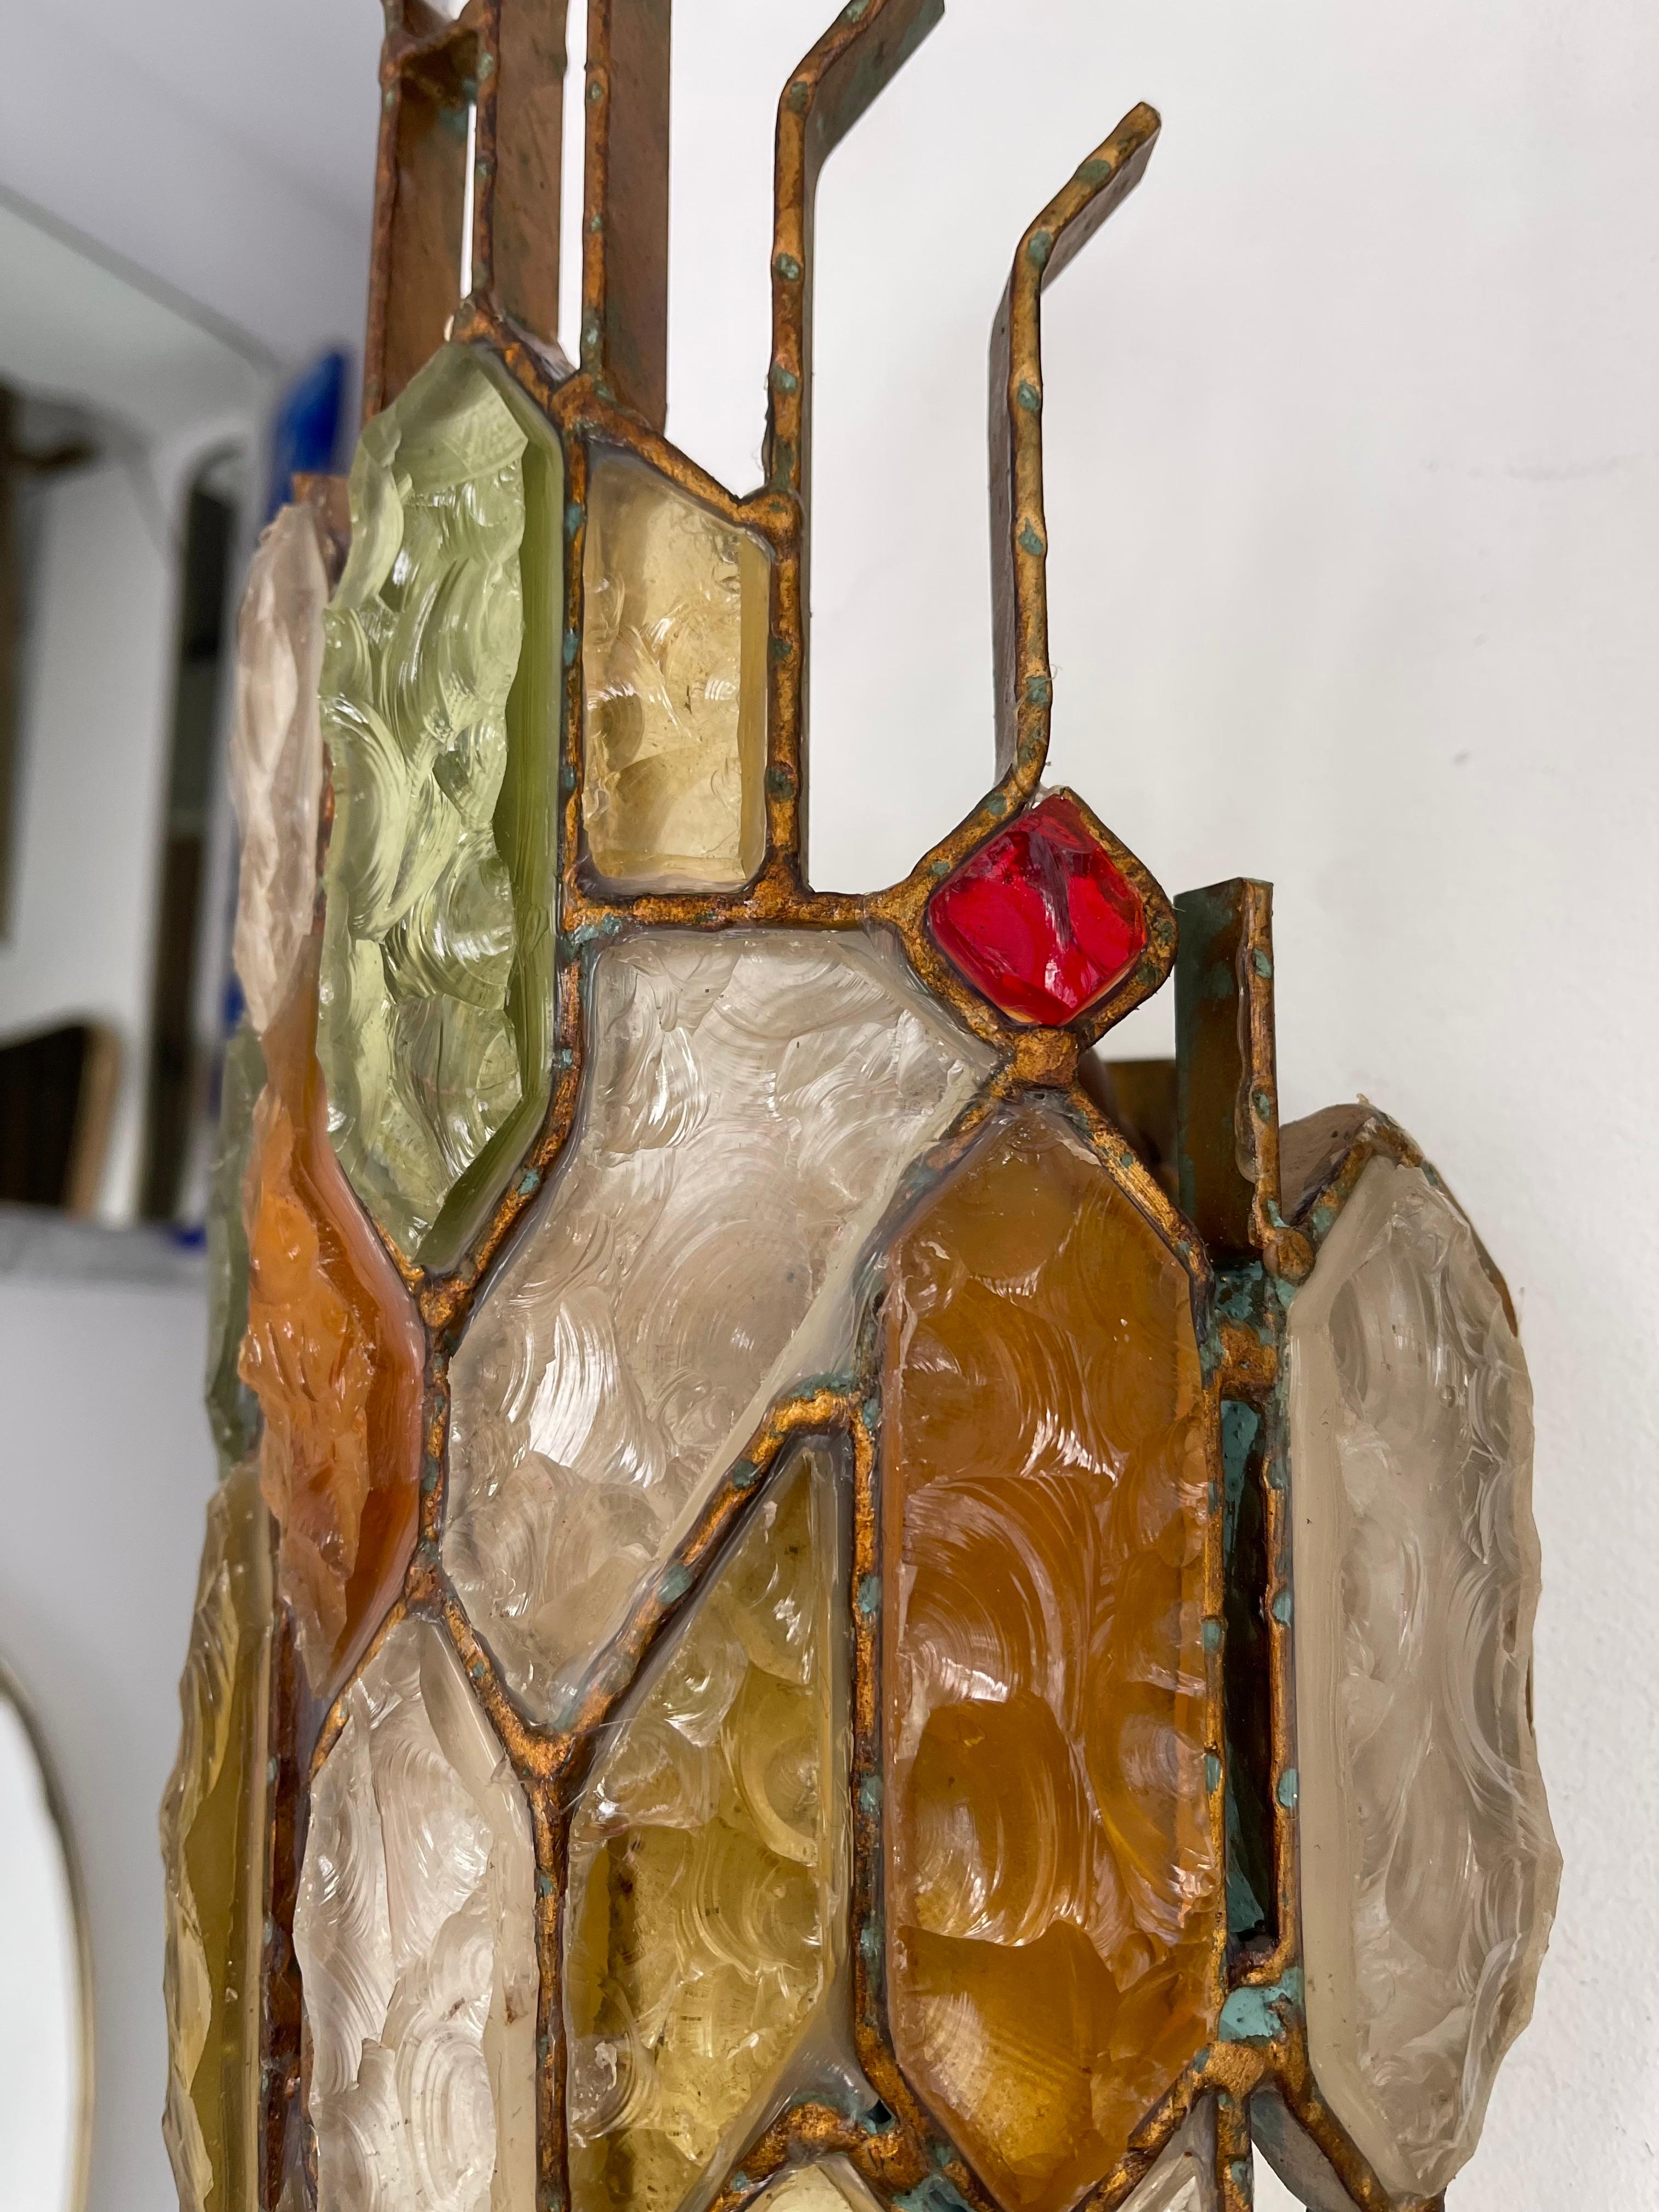 Pair of Hammered Glass Wrought Iron Sconces by Longobard, Italy, 1970s For Sale 5